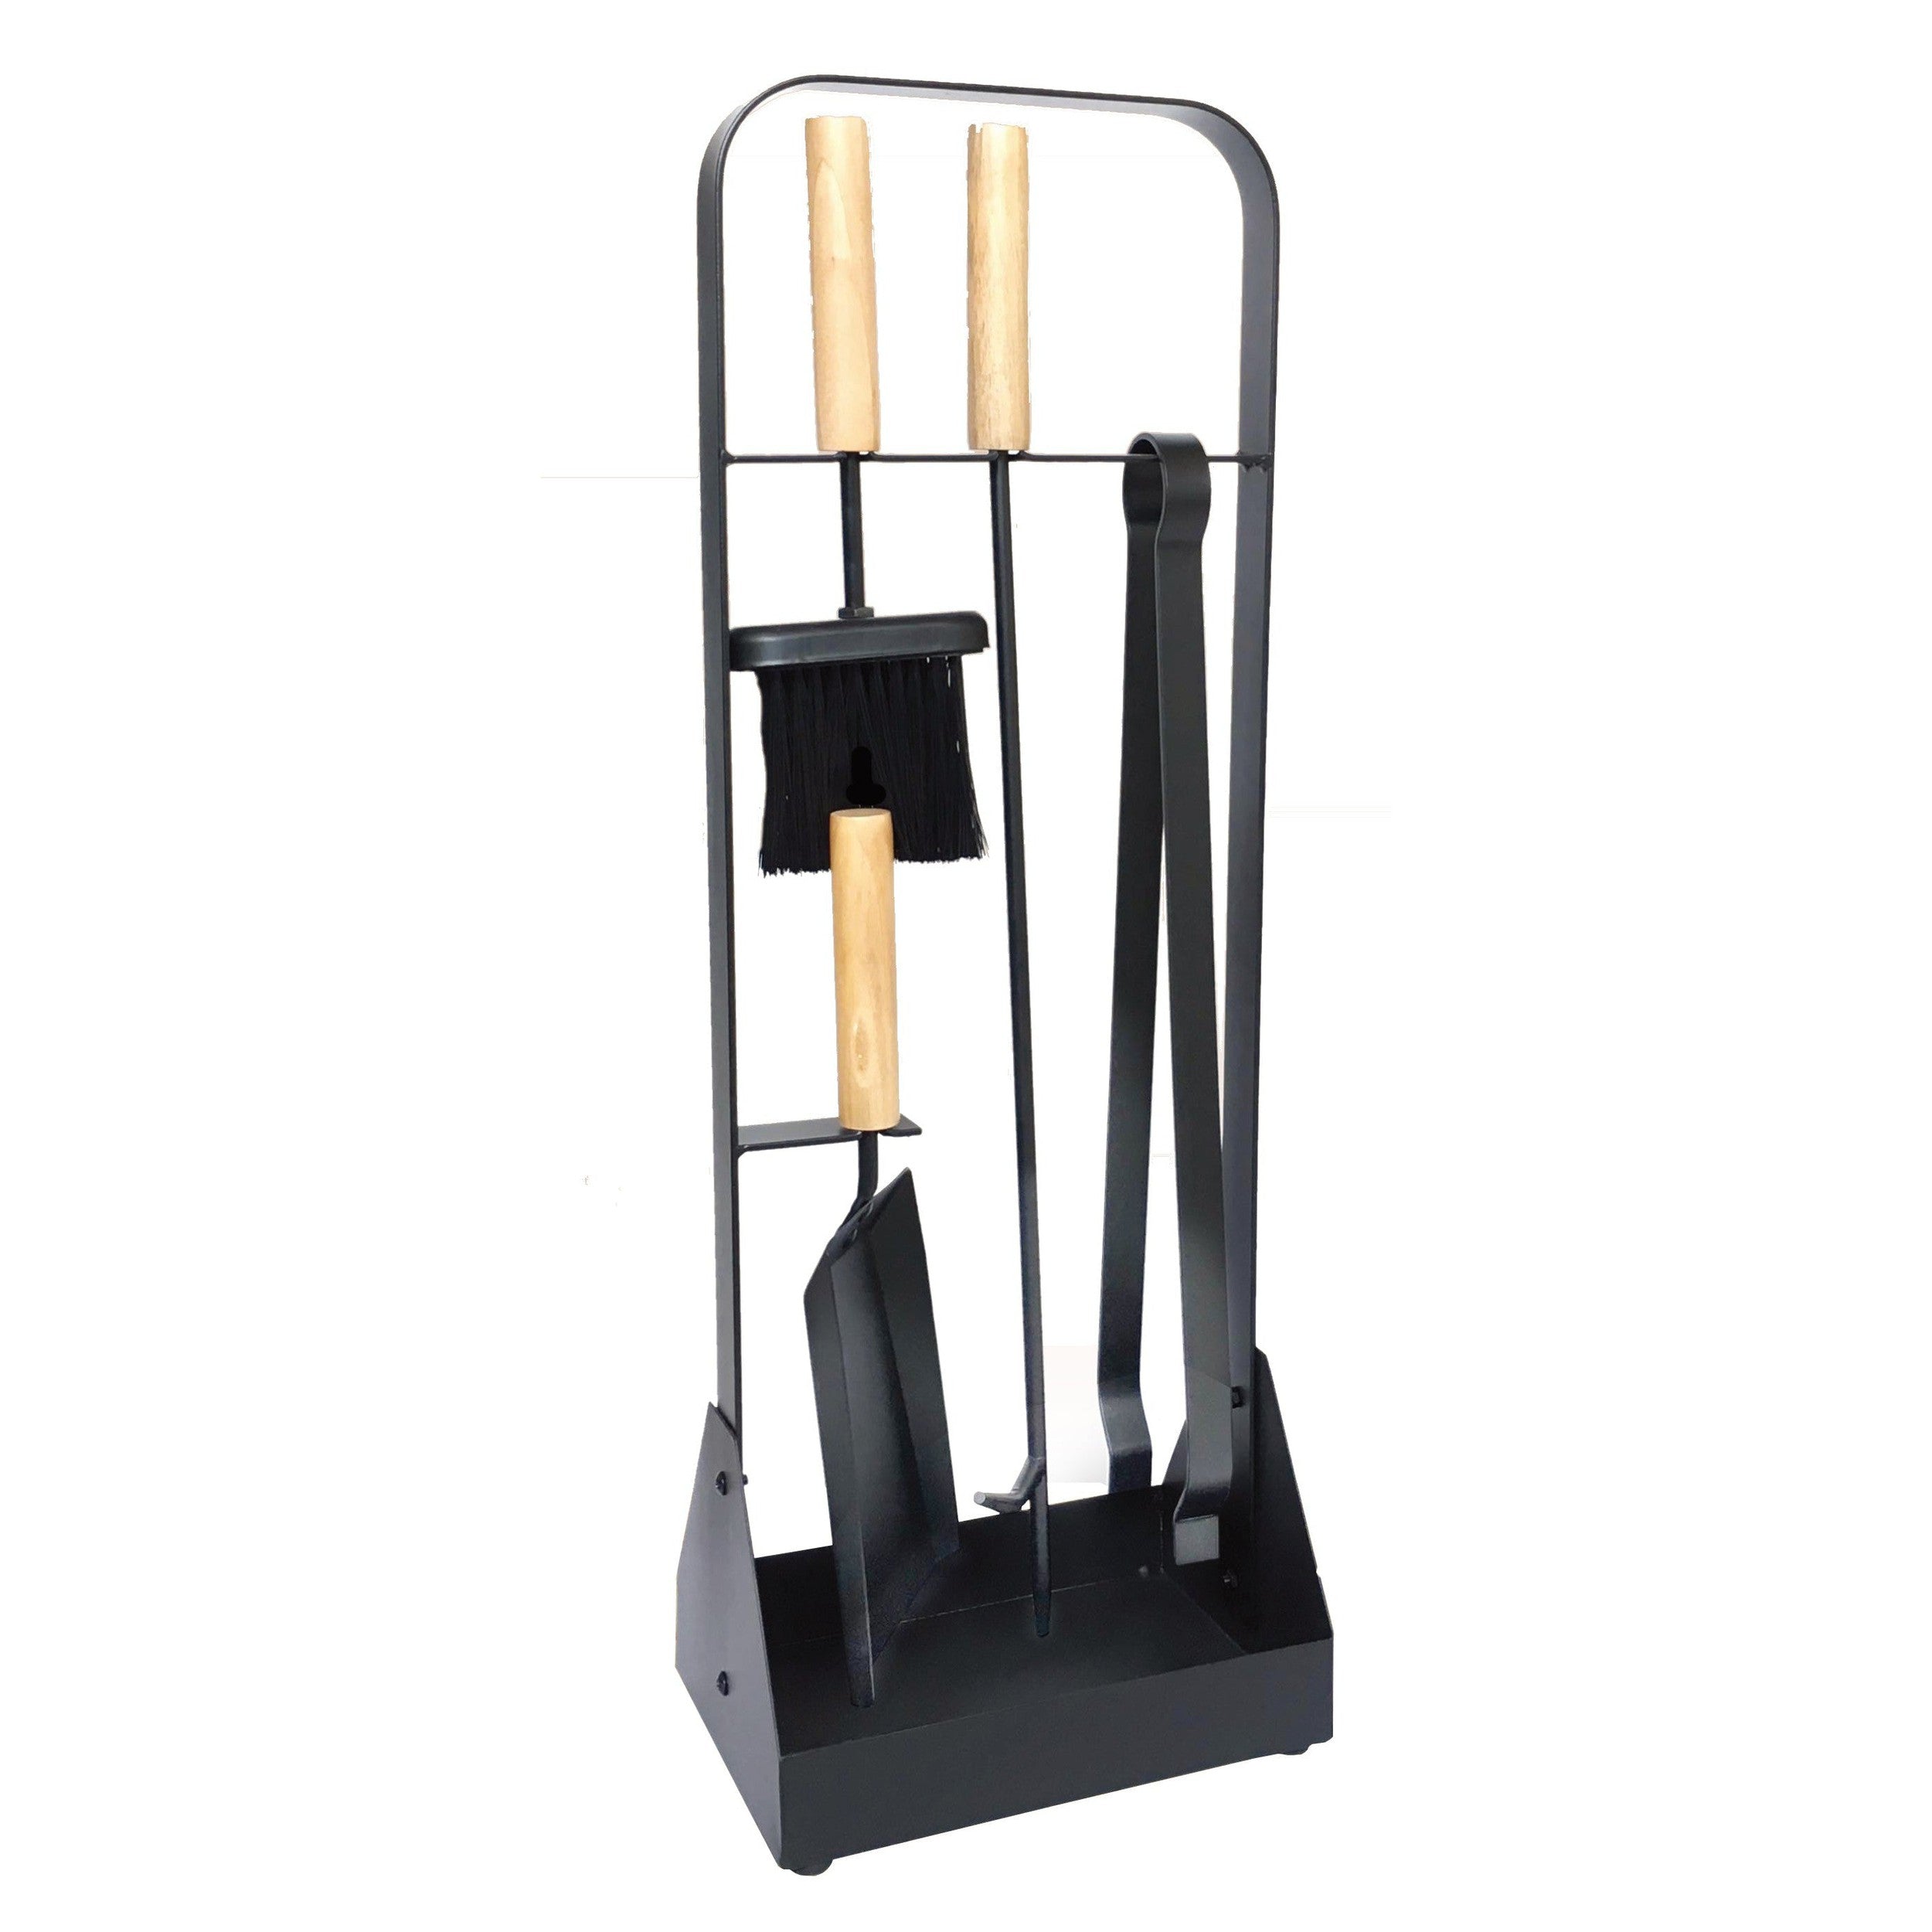 Deluxe Fire Tool Set 4 Piece + Stand - Black with Timber Handles